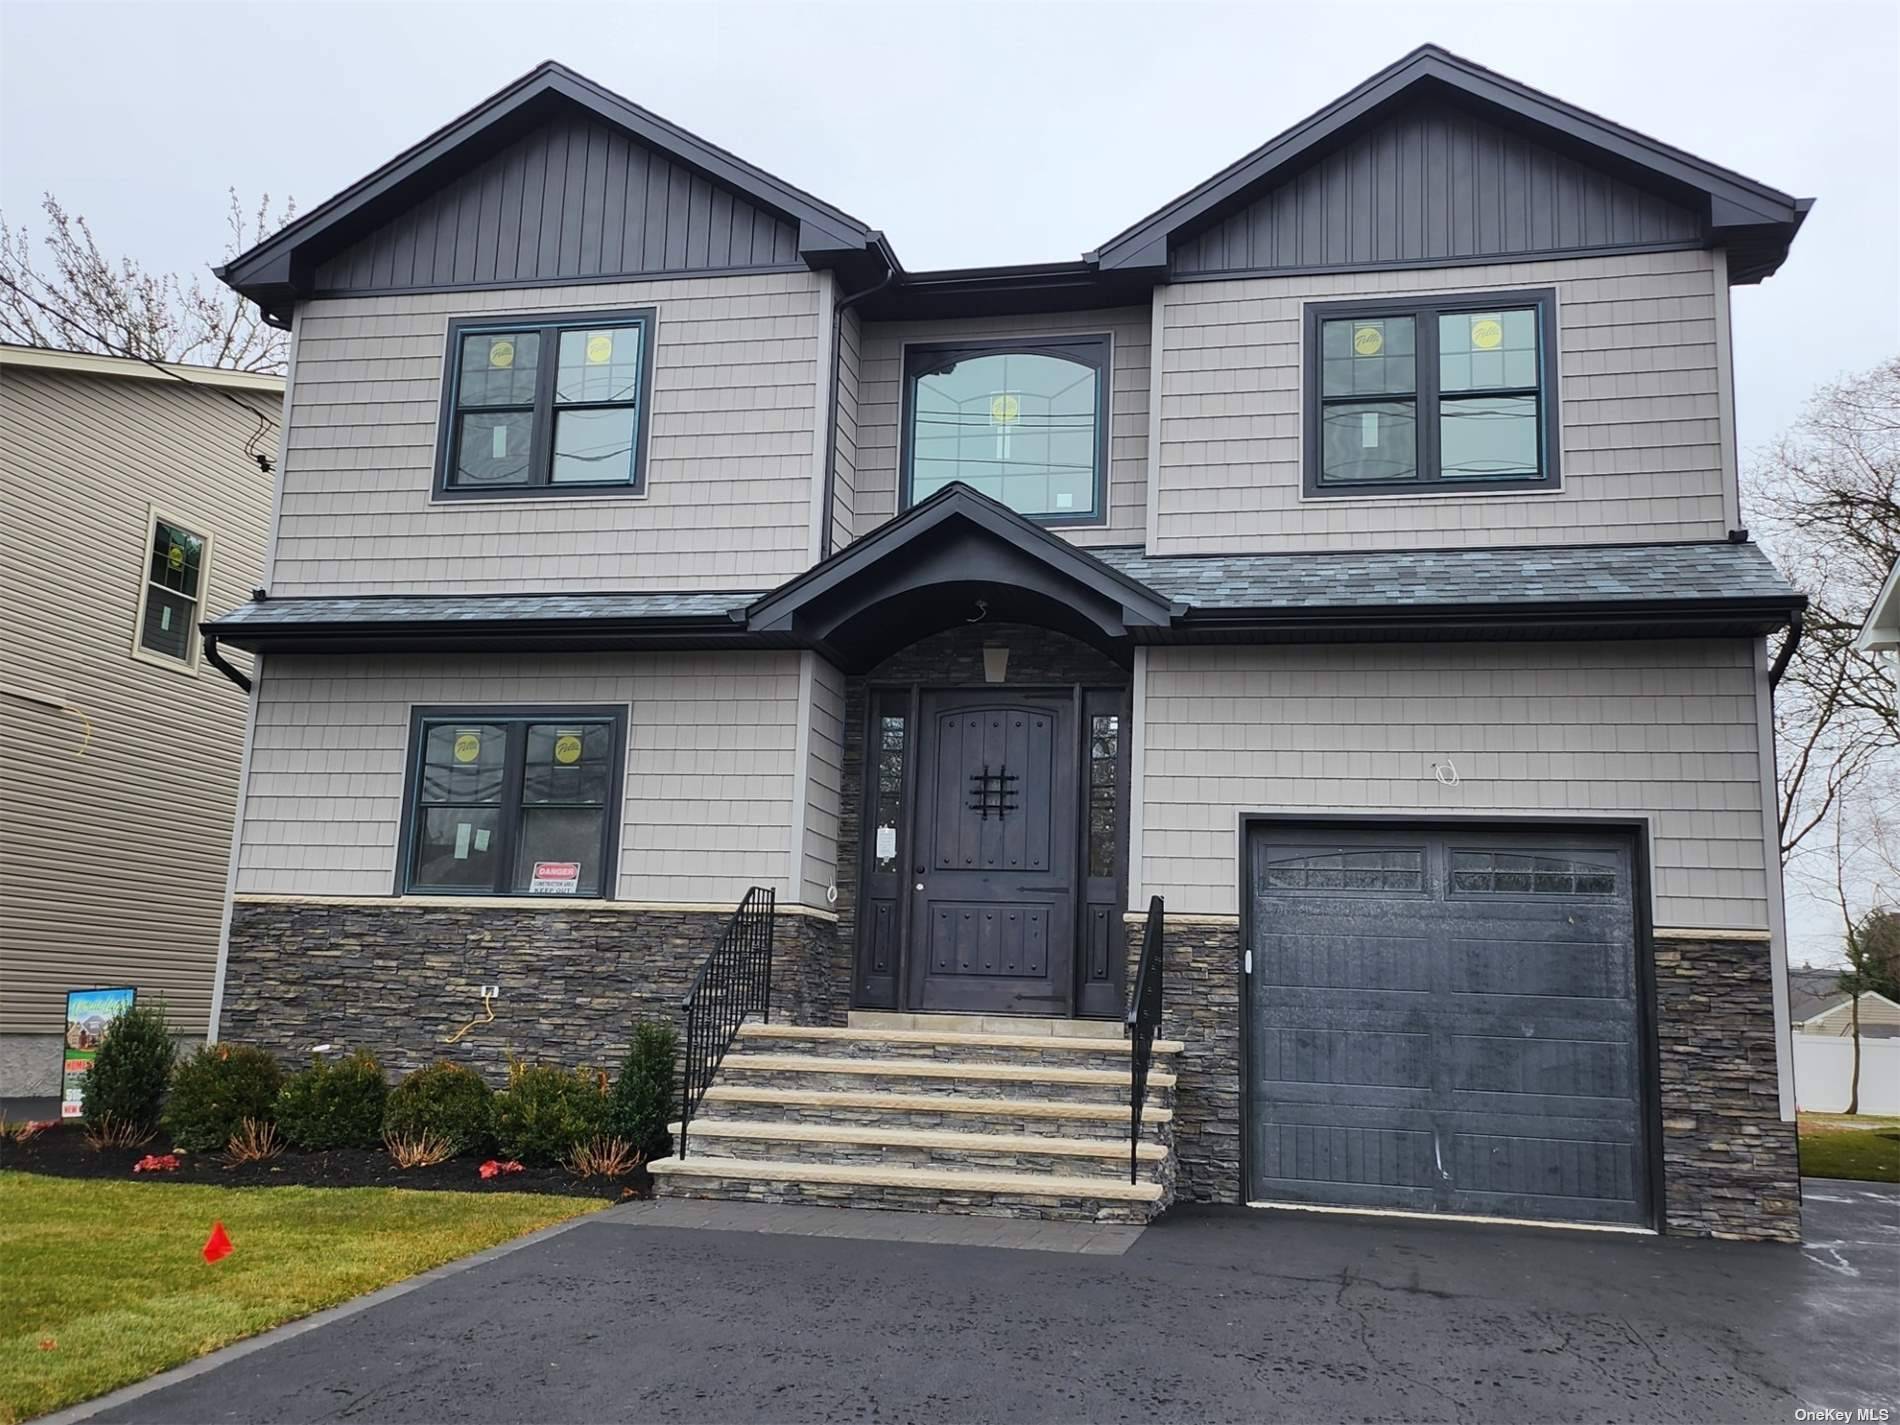 Beautifull New Construction with all the amenities you can think of 3 New Houses each on a large 50 X 150 Lots with 6 cars Parking spaces plus attach garage.